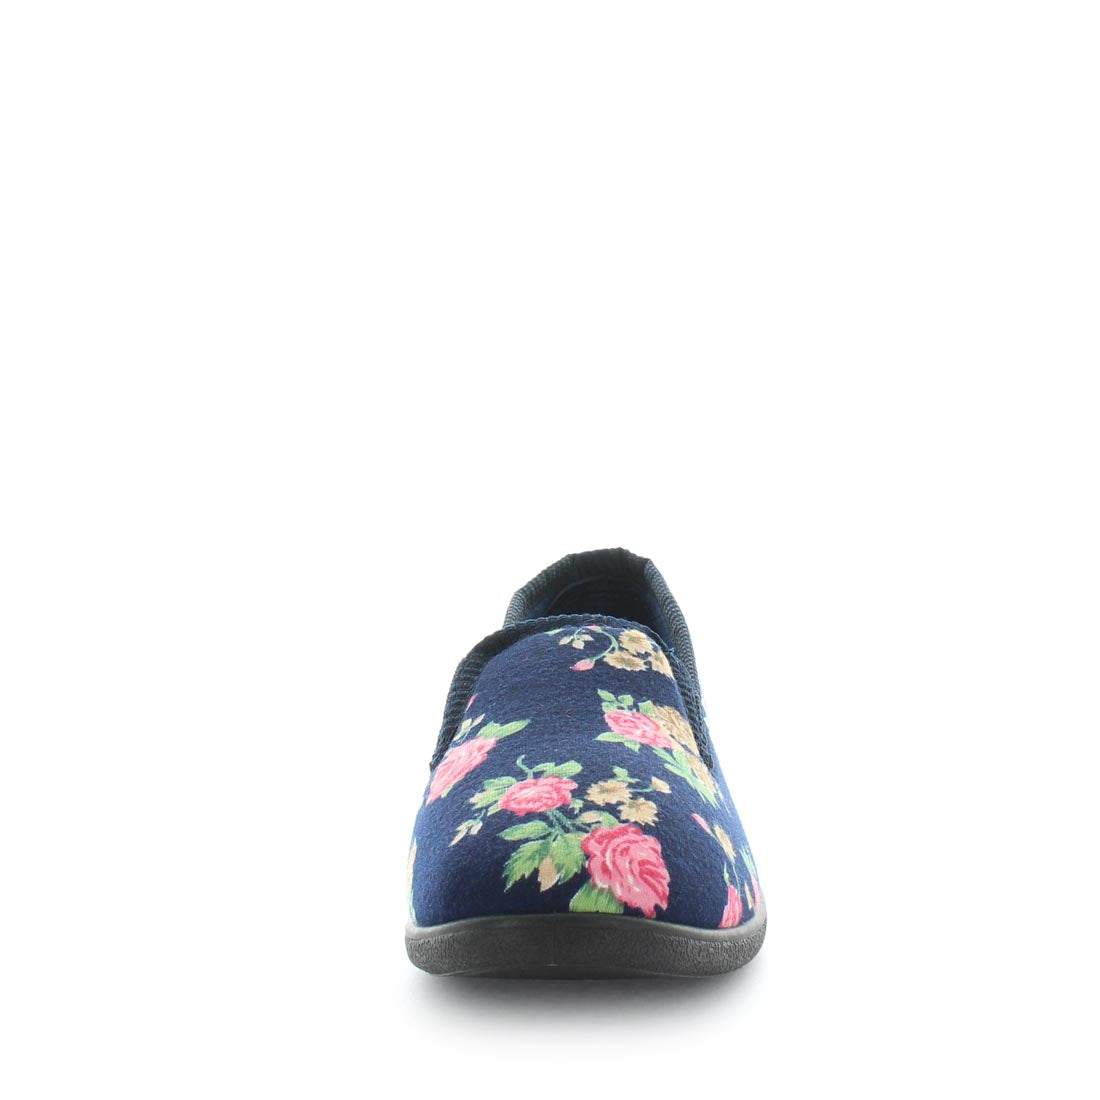 Load image into Gallery viewer, womens slippers - Navy Floral Erta slipper, by panda Slippers. A slip on style slipper with embossed velour twin gussets and a quilted satin lining and sock for a soft to the touch feel.
